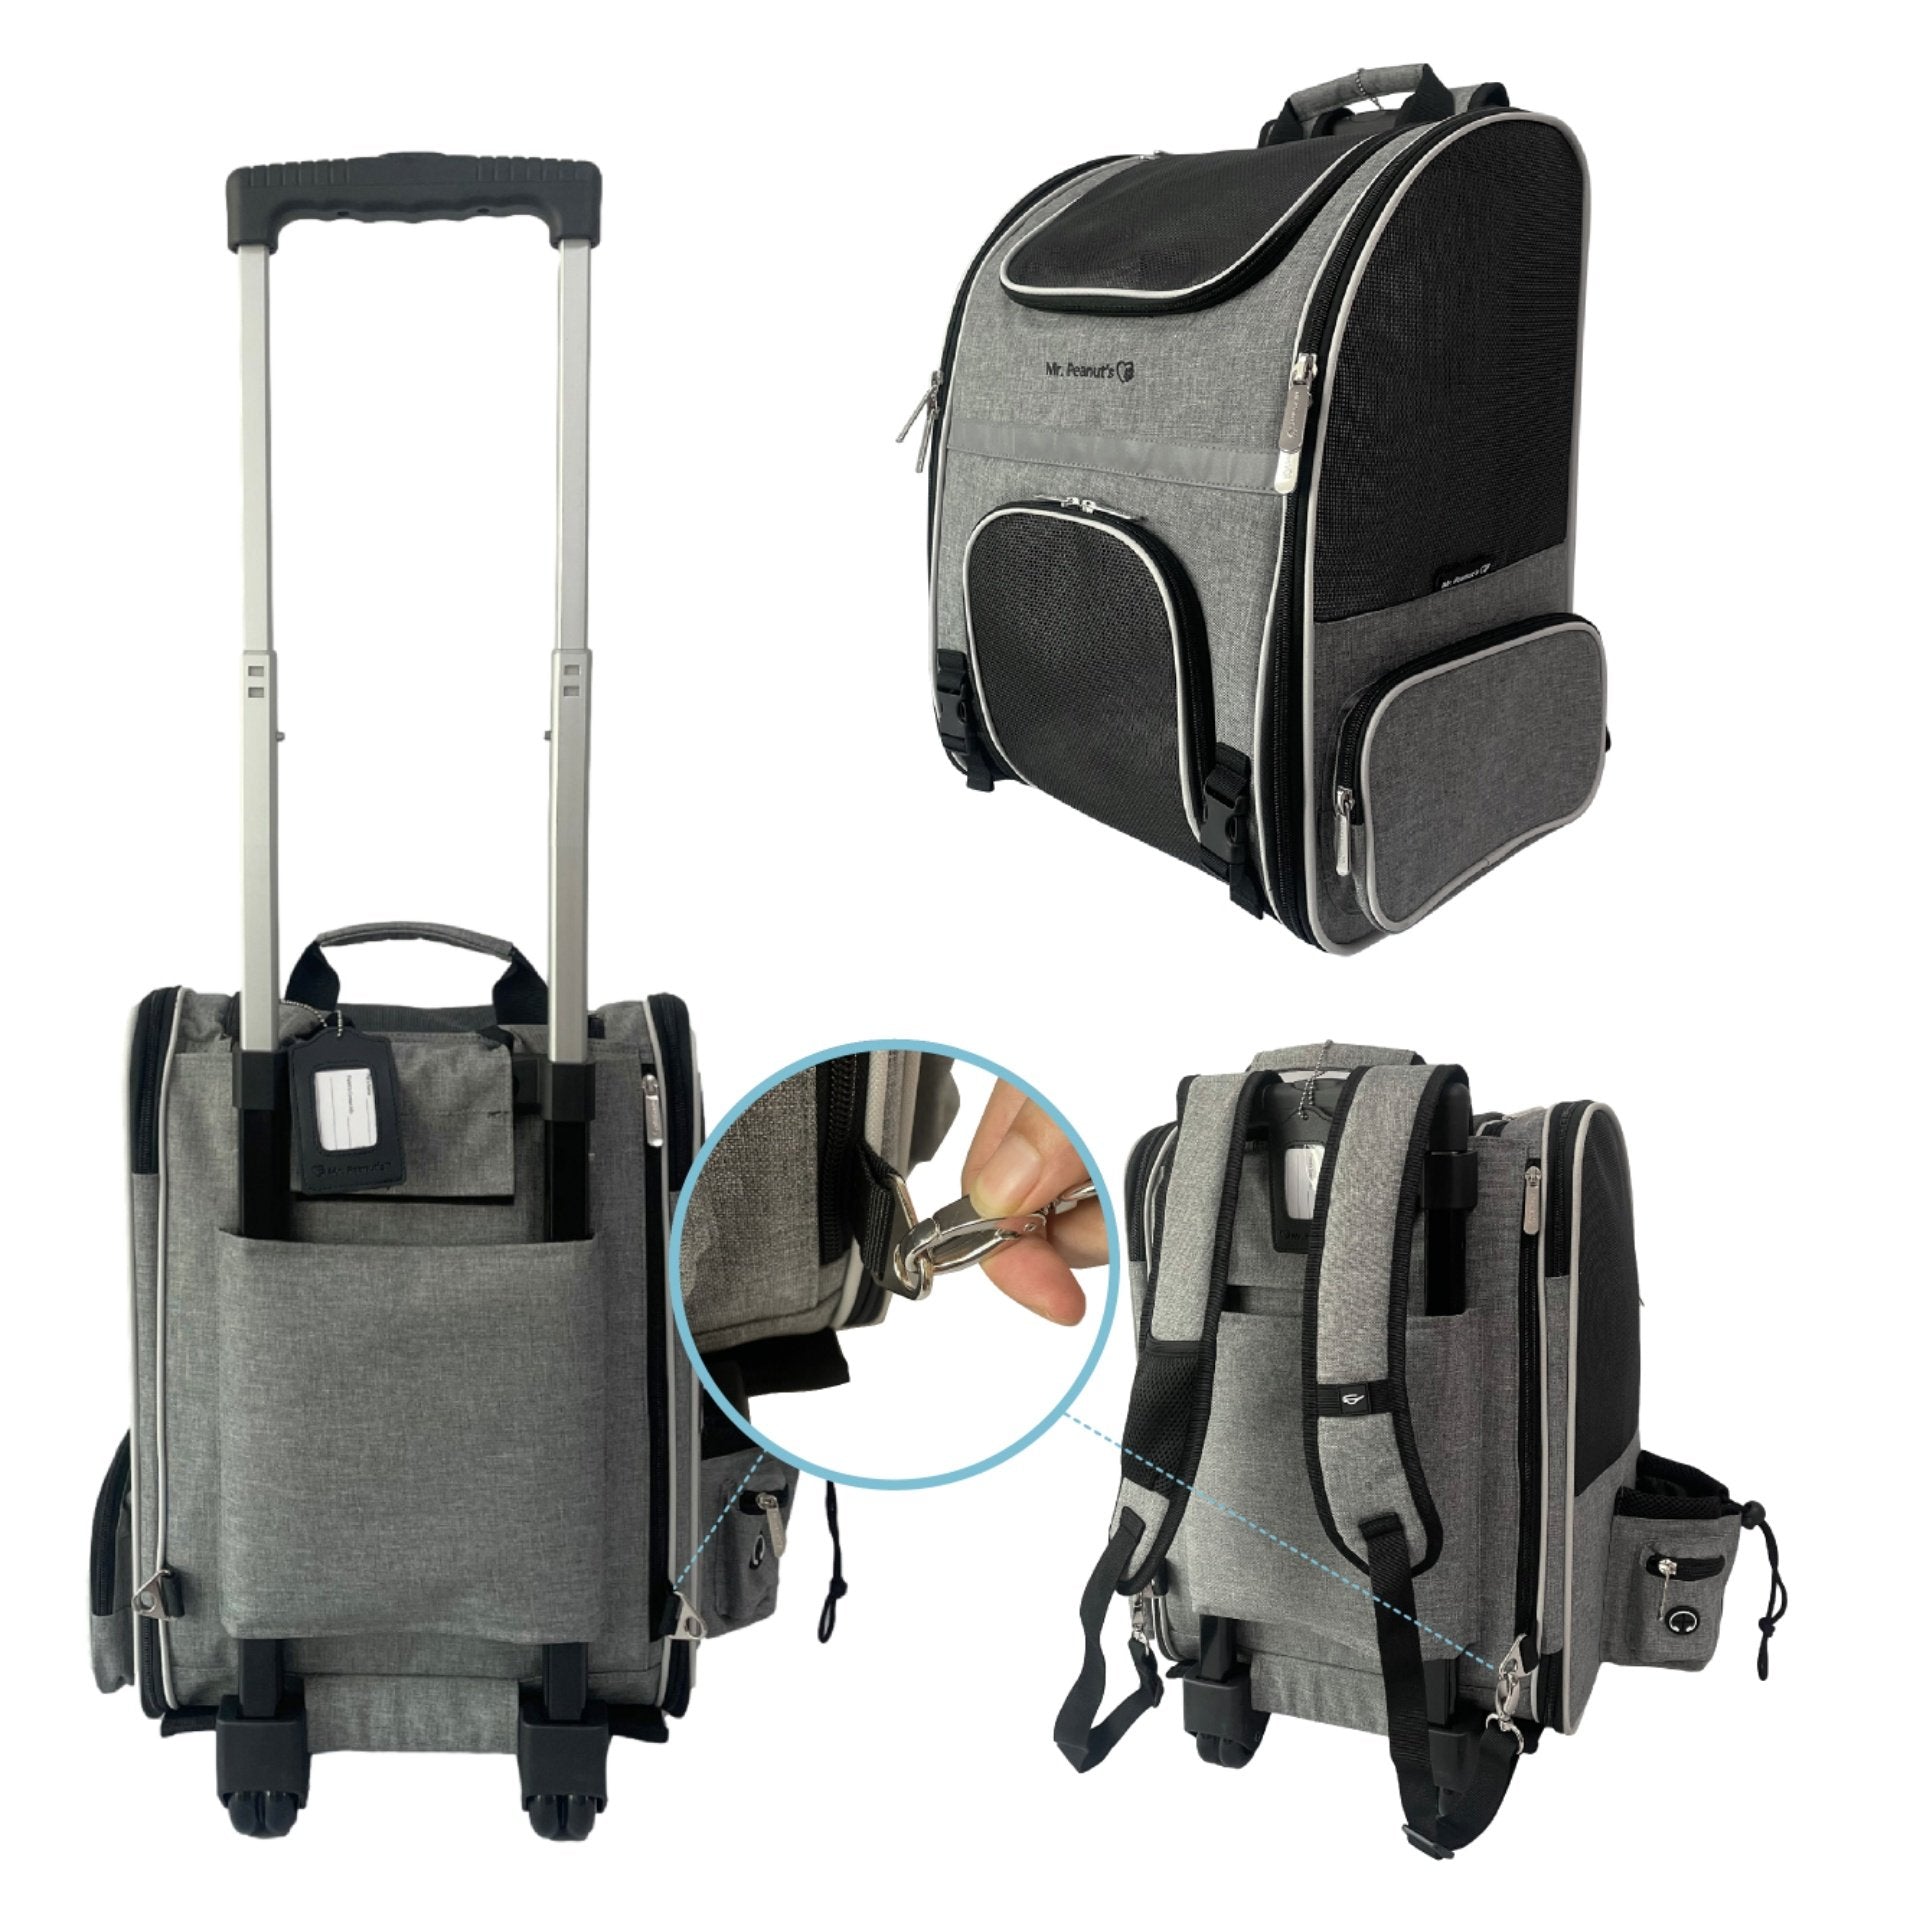 Rolling Pet Carrier For Dogs: 2 Compartments & Wheels For Stress-Free  Travel!